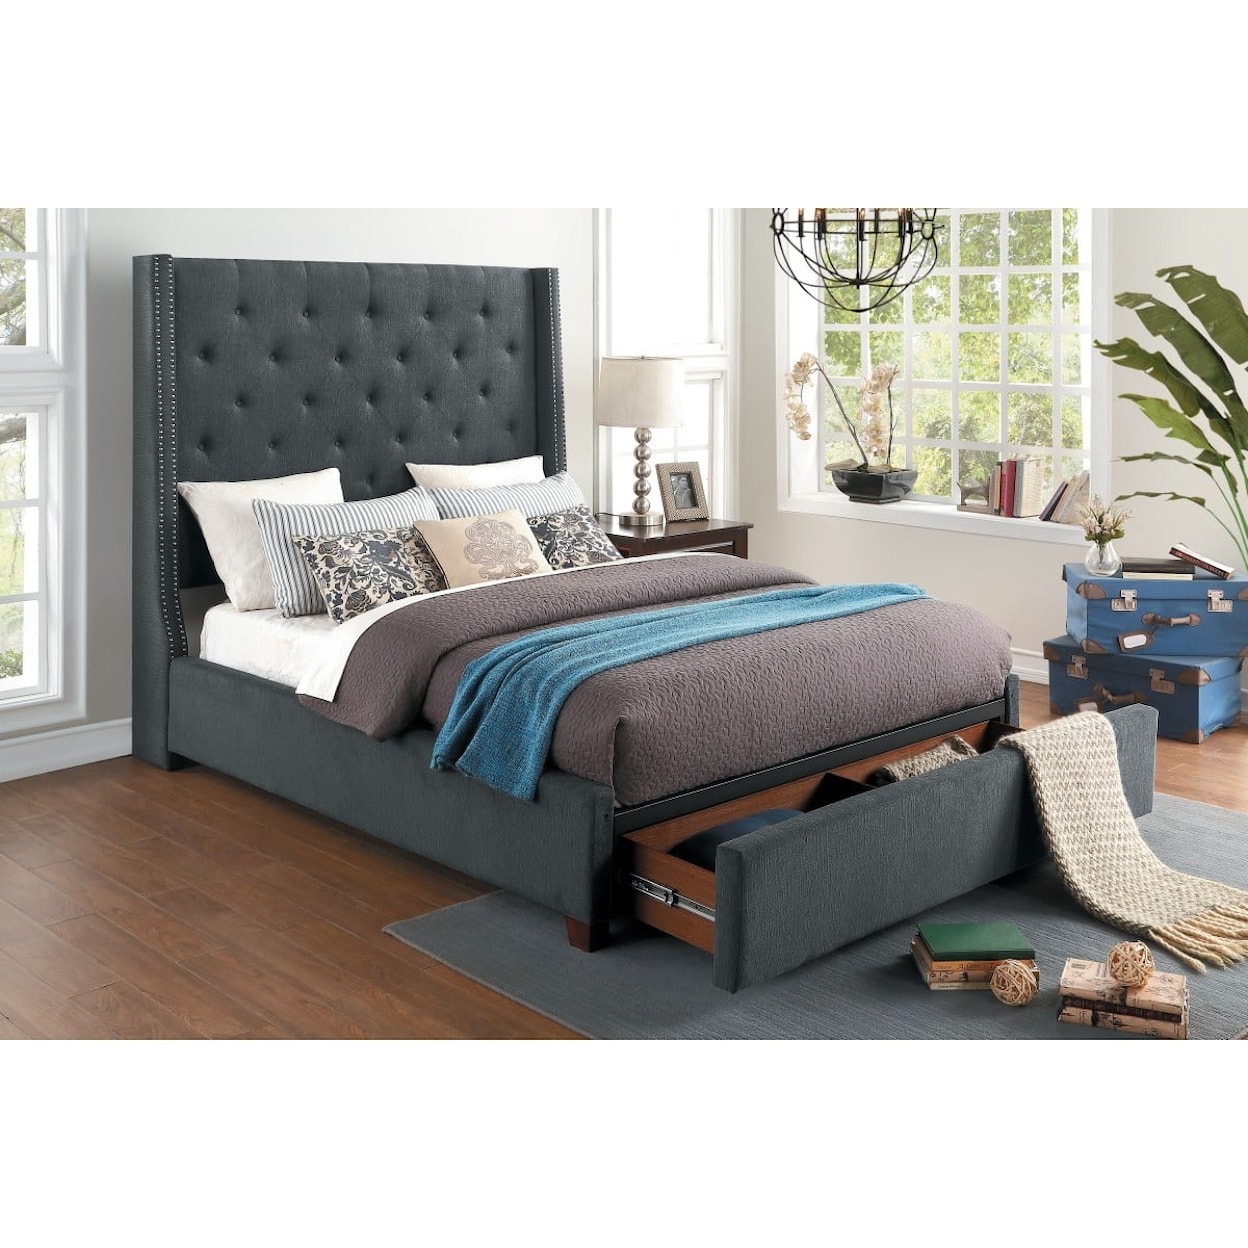 Homelegance Furniture Fairborn CA King  Bed with Storage FB